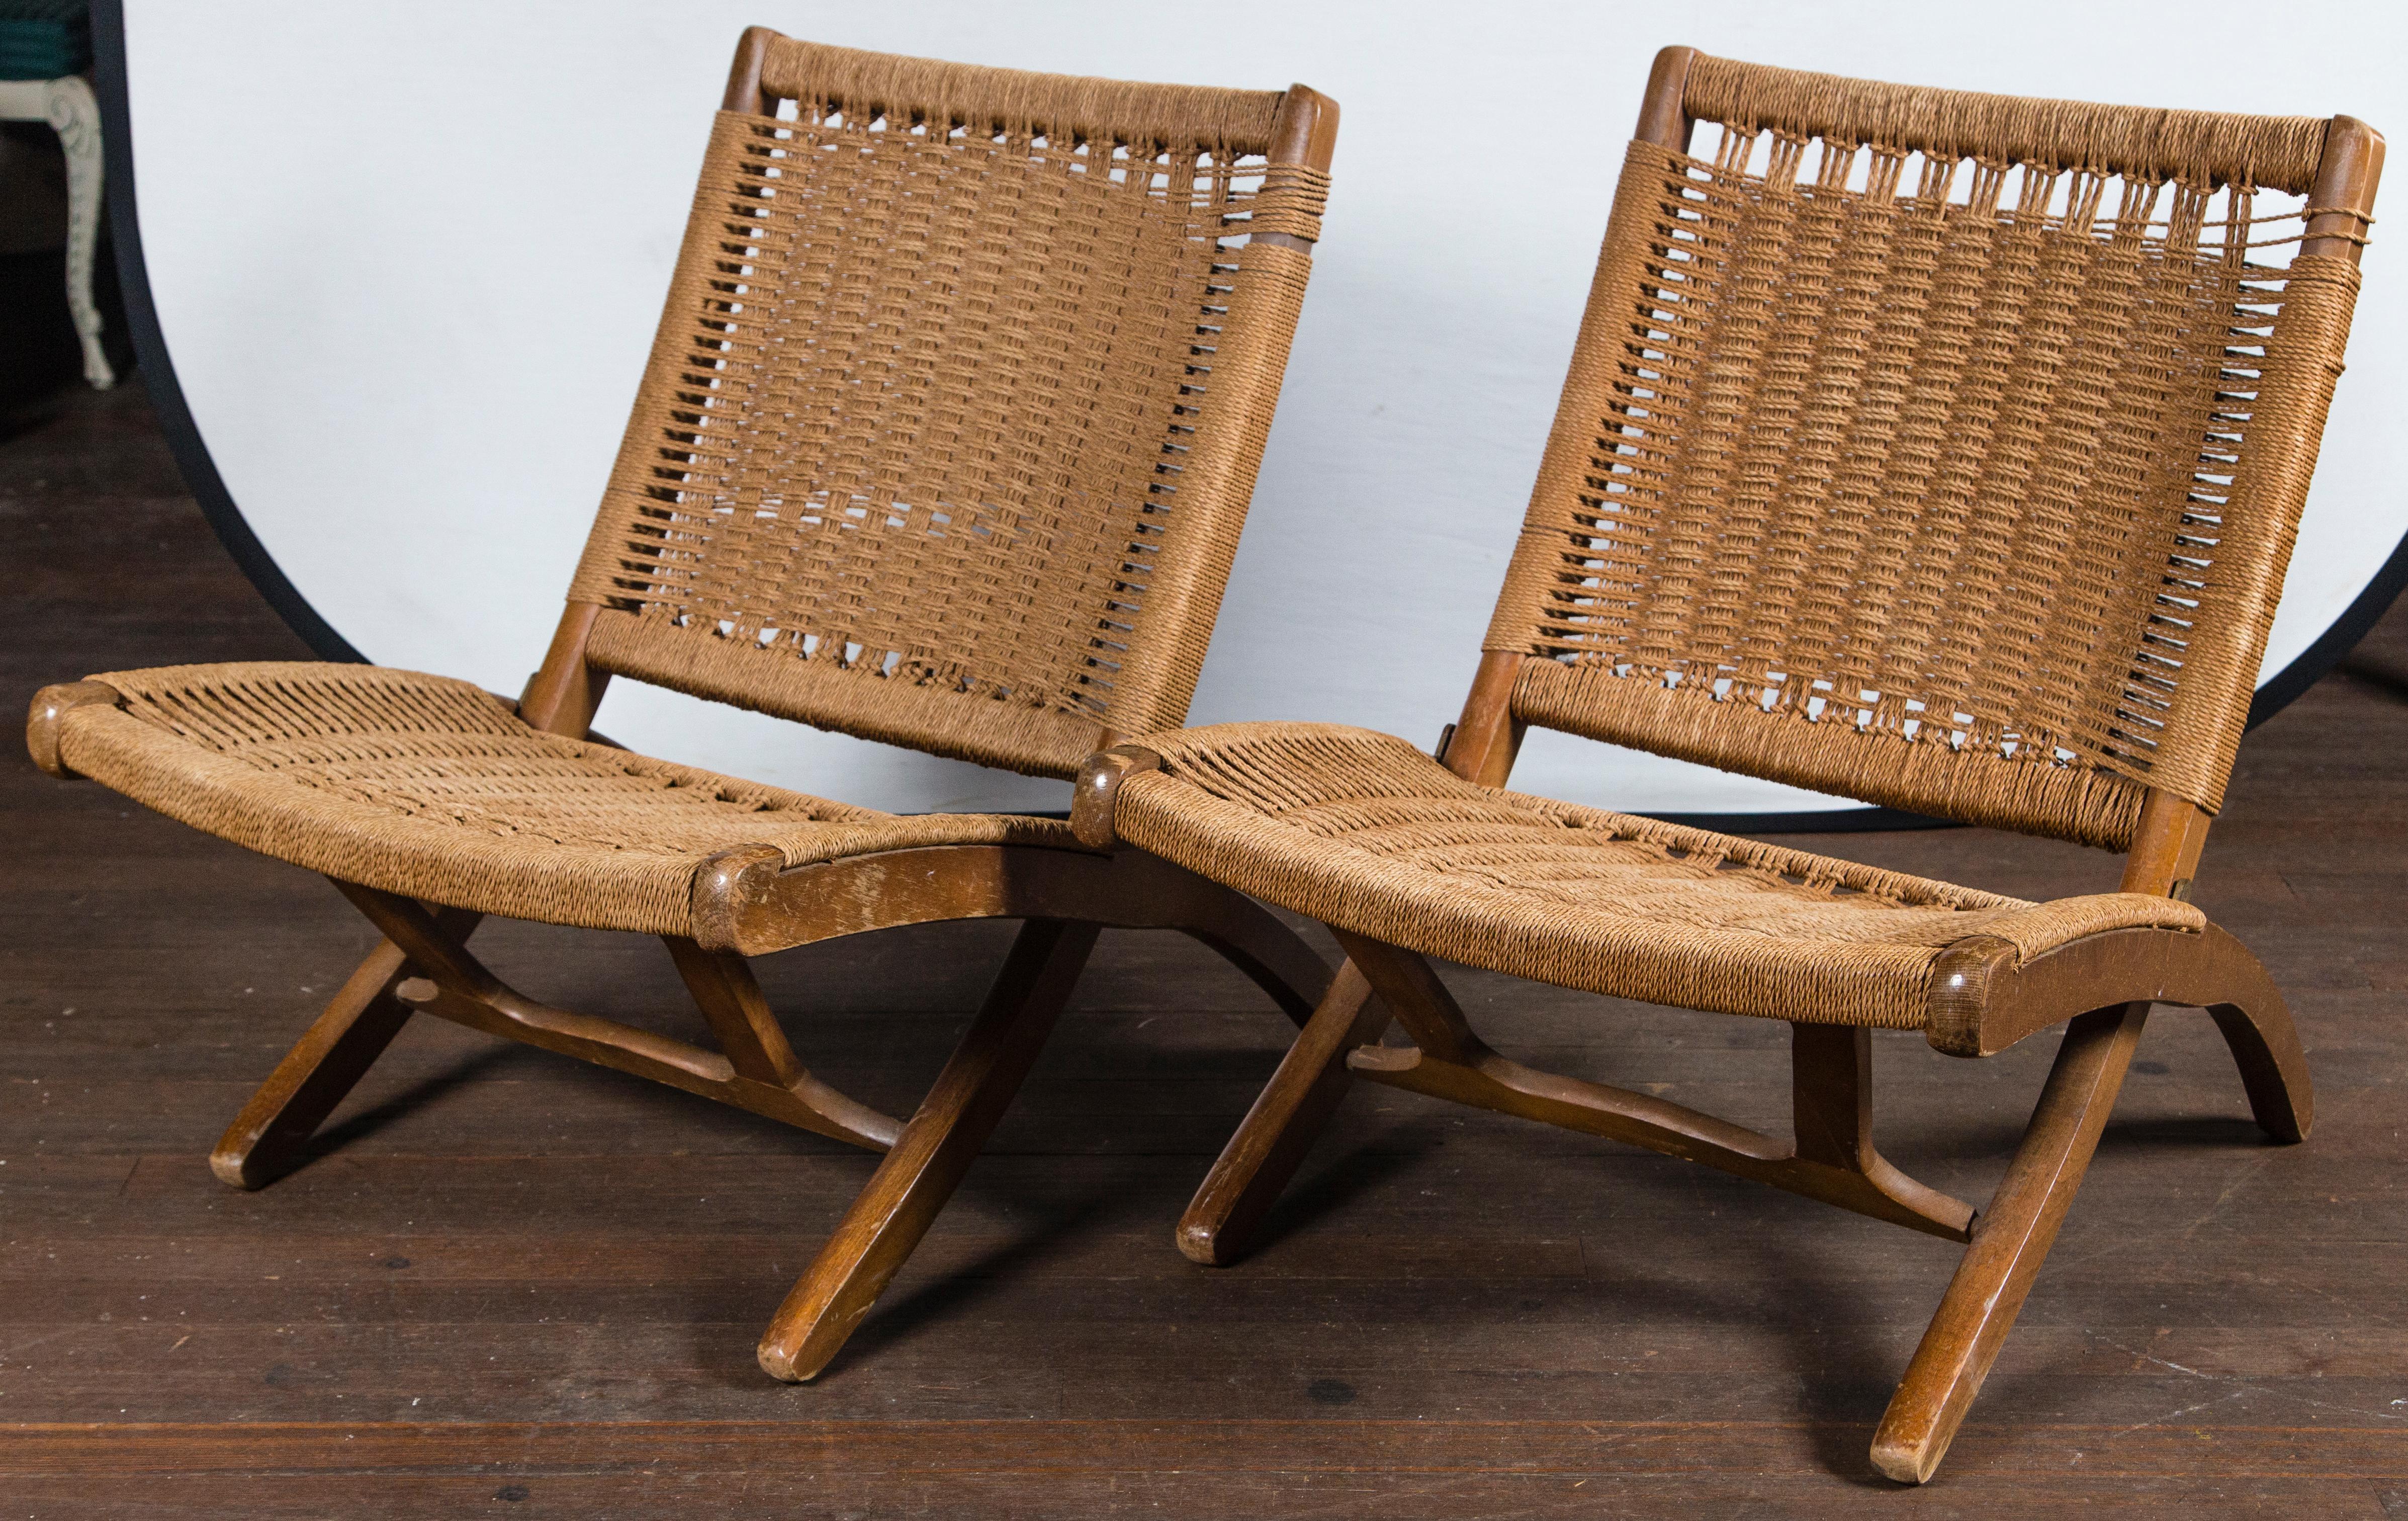 Pair of strong natural fiber woven and wood folding chairs. It the style of Hans Wegner.